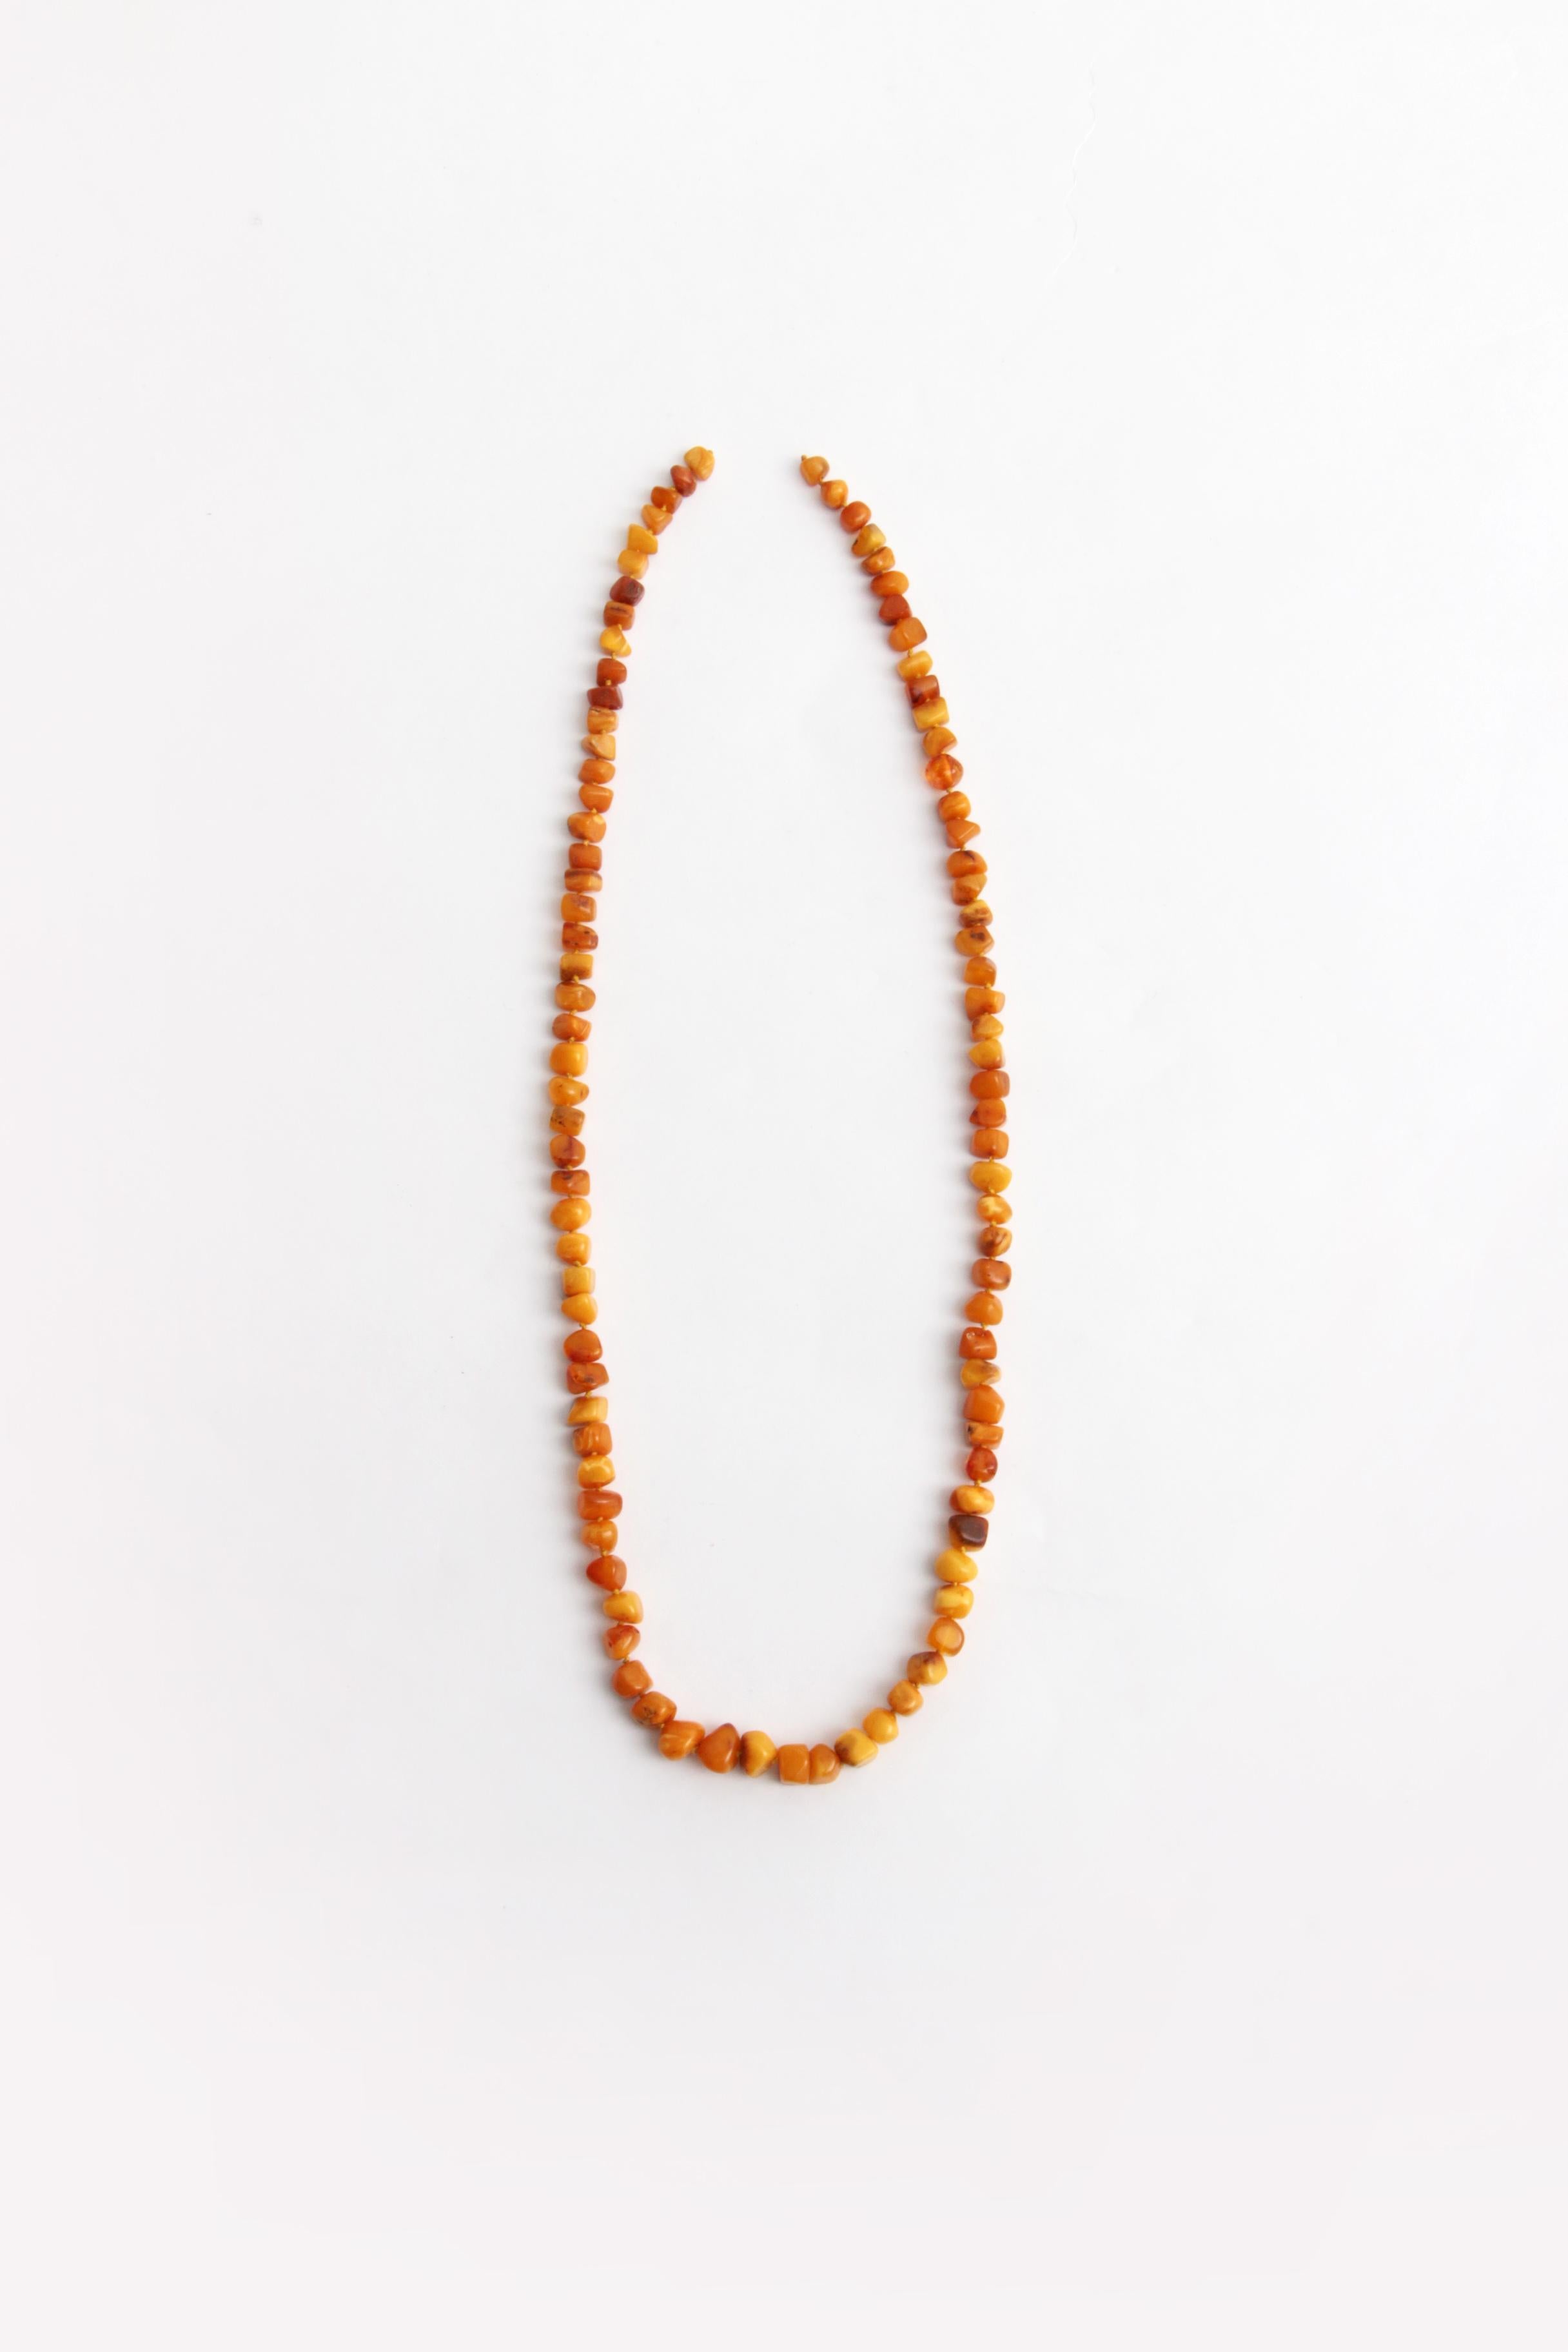 Do you also want to wear something nice and especially something that others don't have, this might be something for you.

This is an amber necklace which is strung with irregular pieces of amber, and beautiful abstract shaped beads.

This